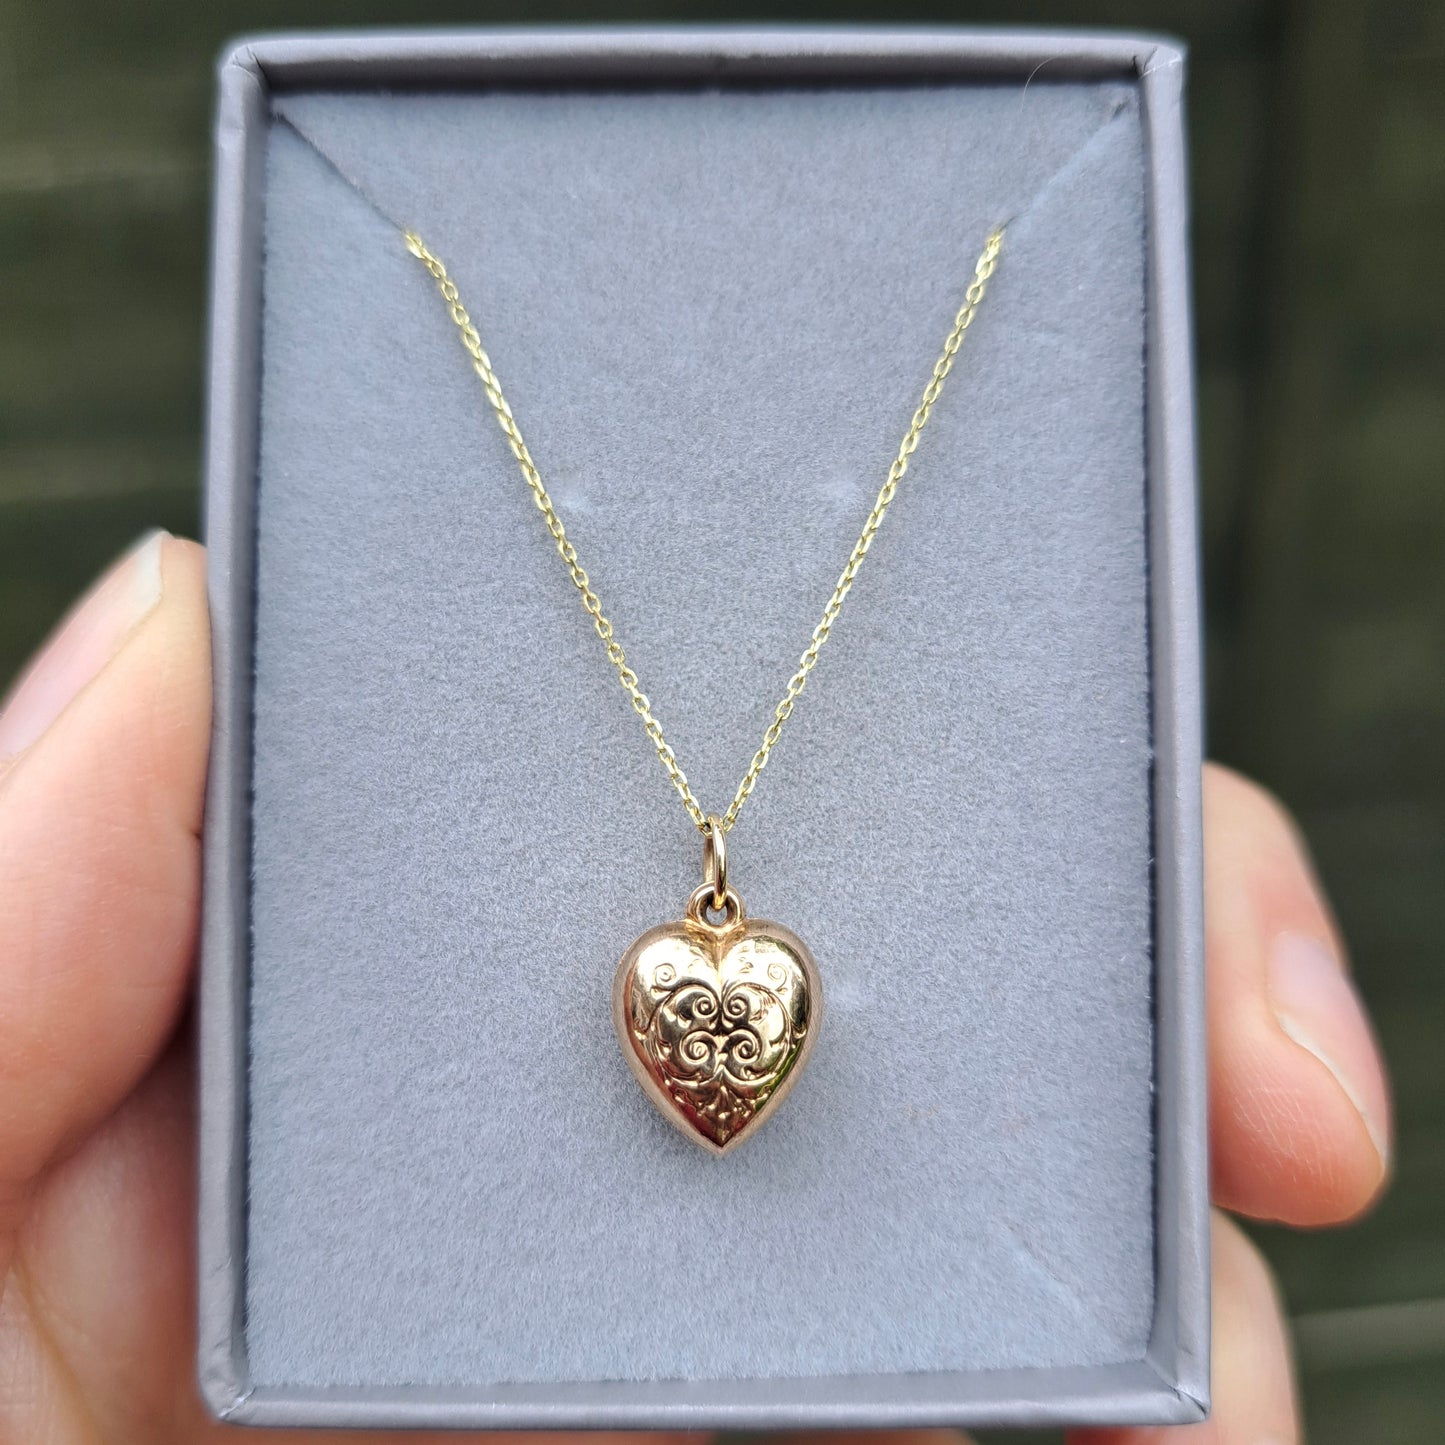 Vintage 1960s 9ct Gold Engraved Puffy Heart Charm, 11mm